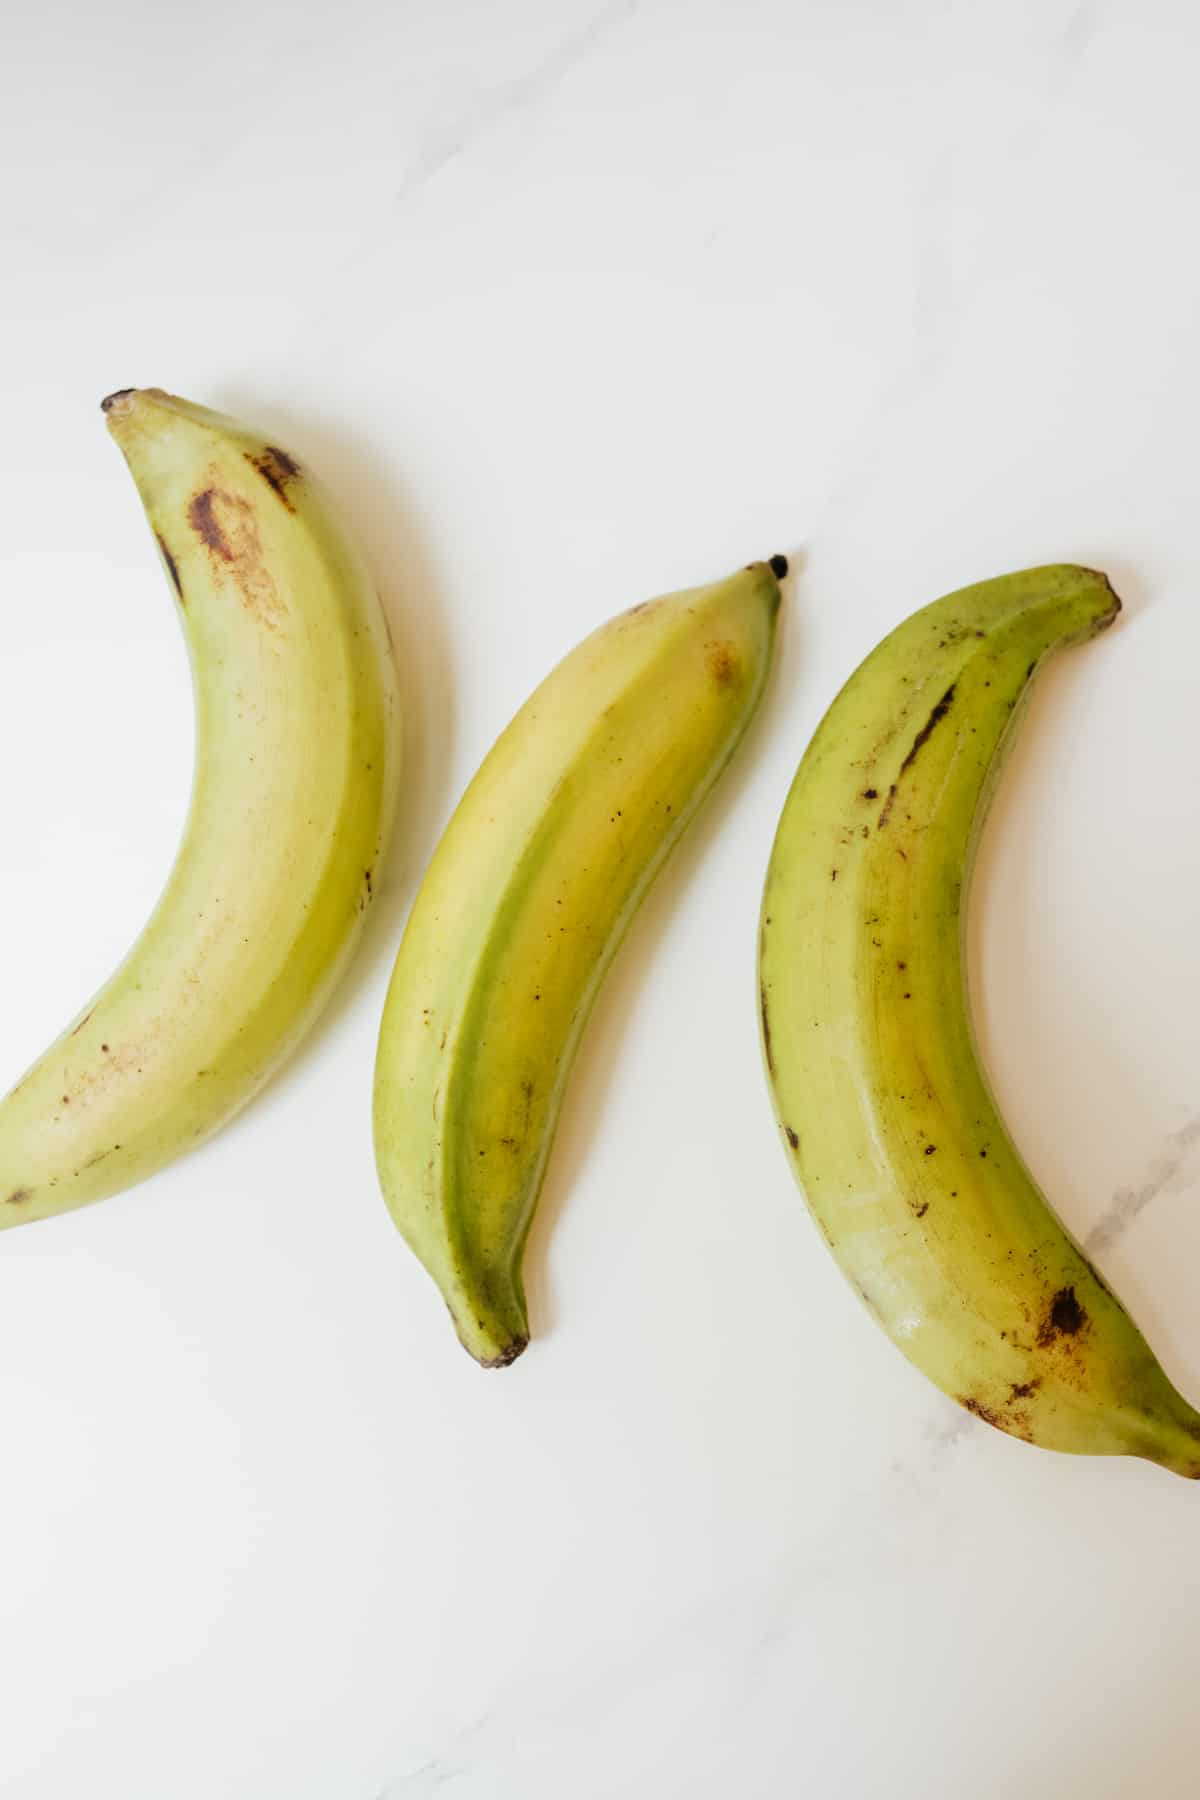 3 green plantains on a white table